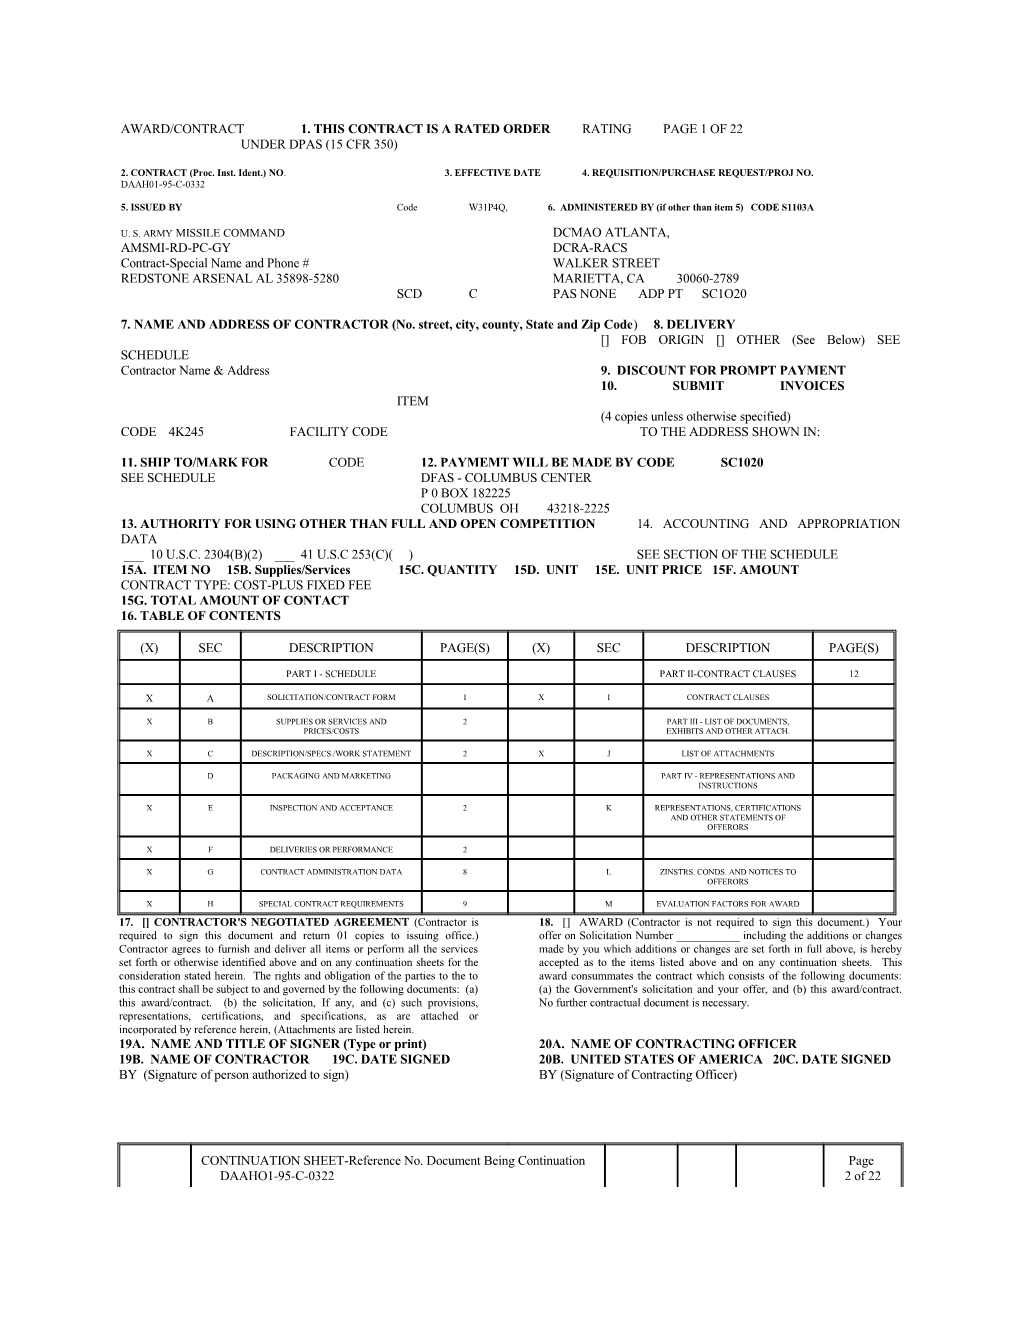 Award/Contract 1. This Contract Is a Rated Order Rating Page 1 of 22